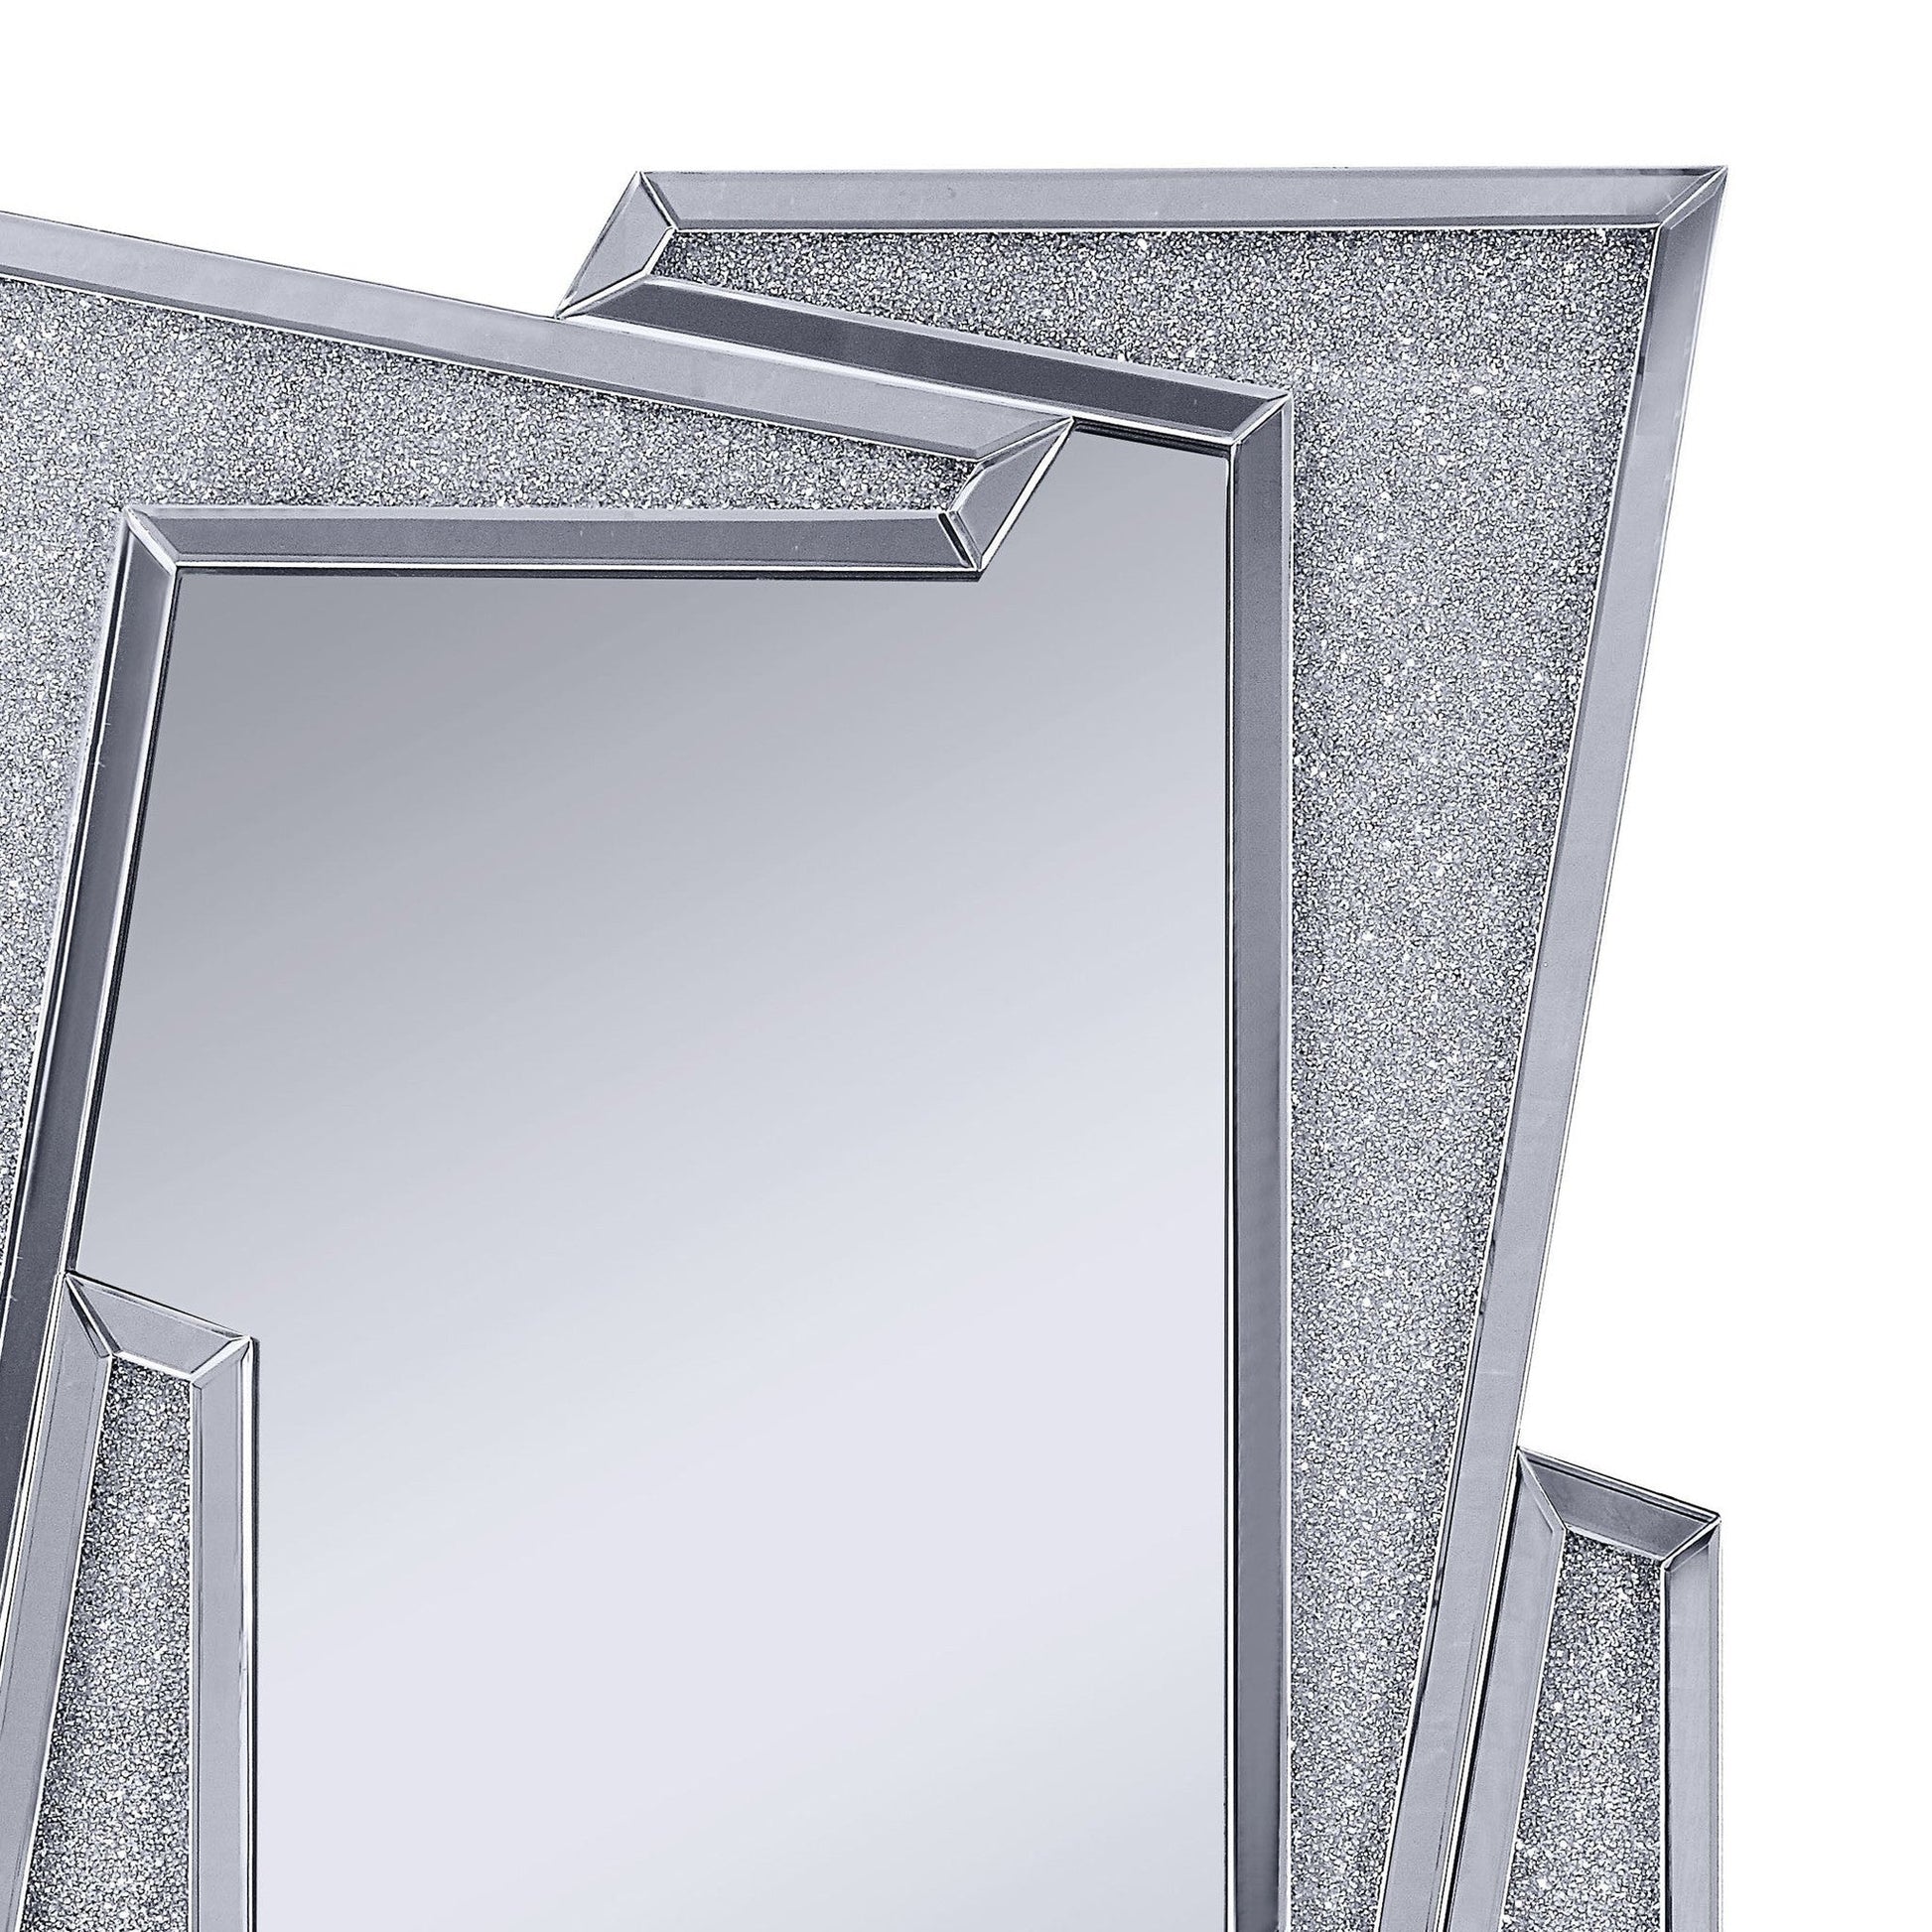 Benzara Silver Mirrored Wooden Frame Accent Wall Decor With Four L Shaped Borders